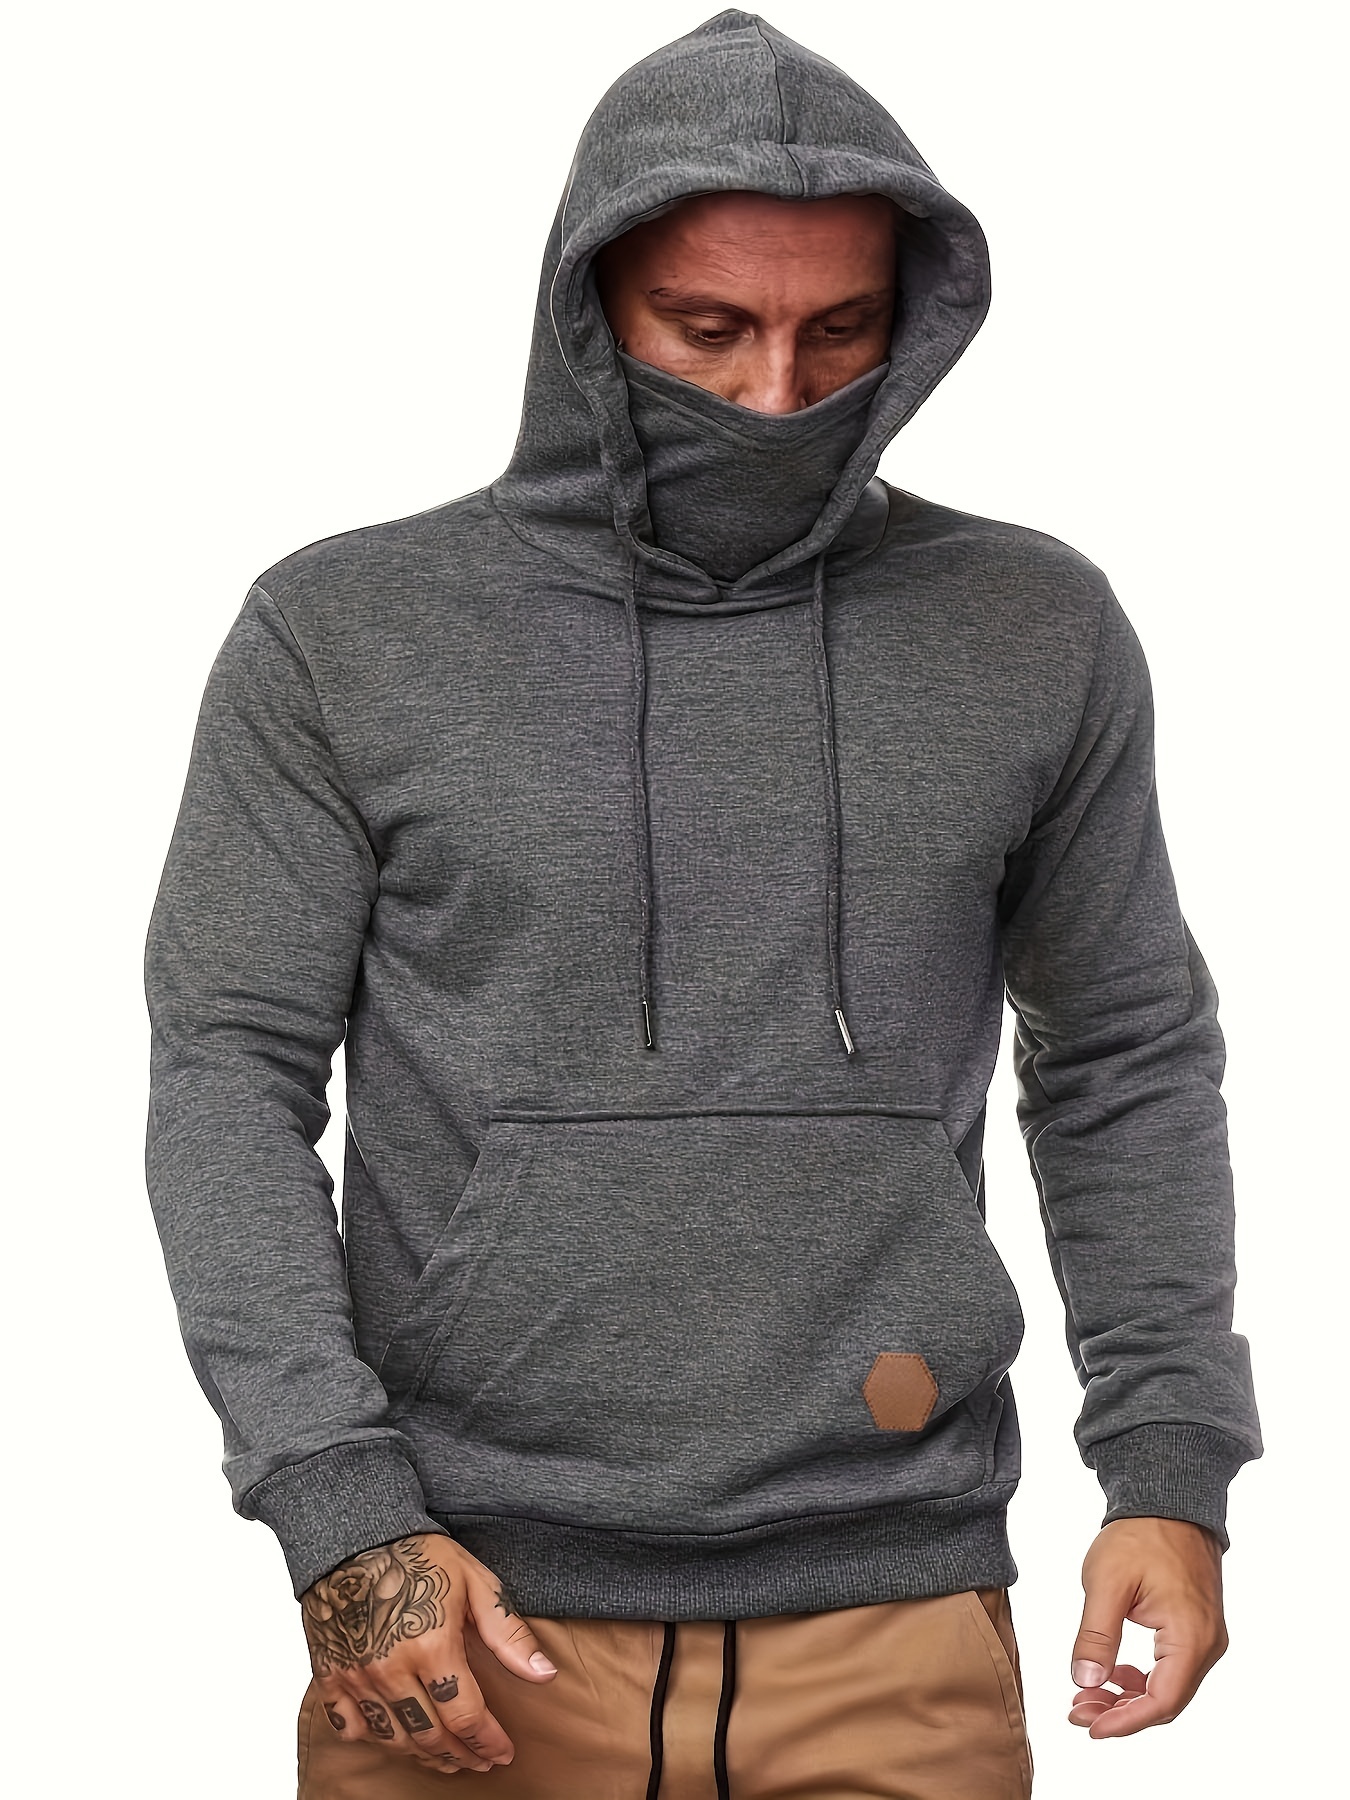 KOOFIN Gear Performance Fishing Hoodie with Face Mask UPF50 Sunblock Shirt Hooded Long Sleeve with Drawstrings Pocket